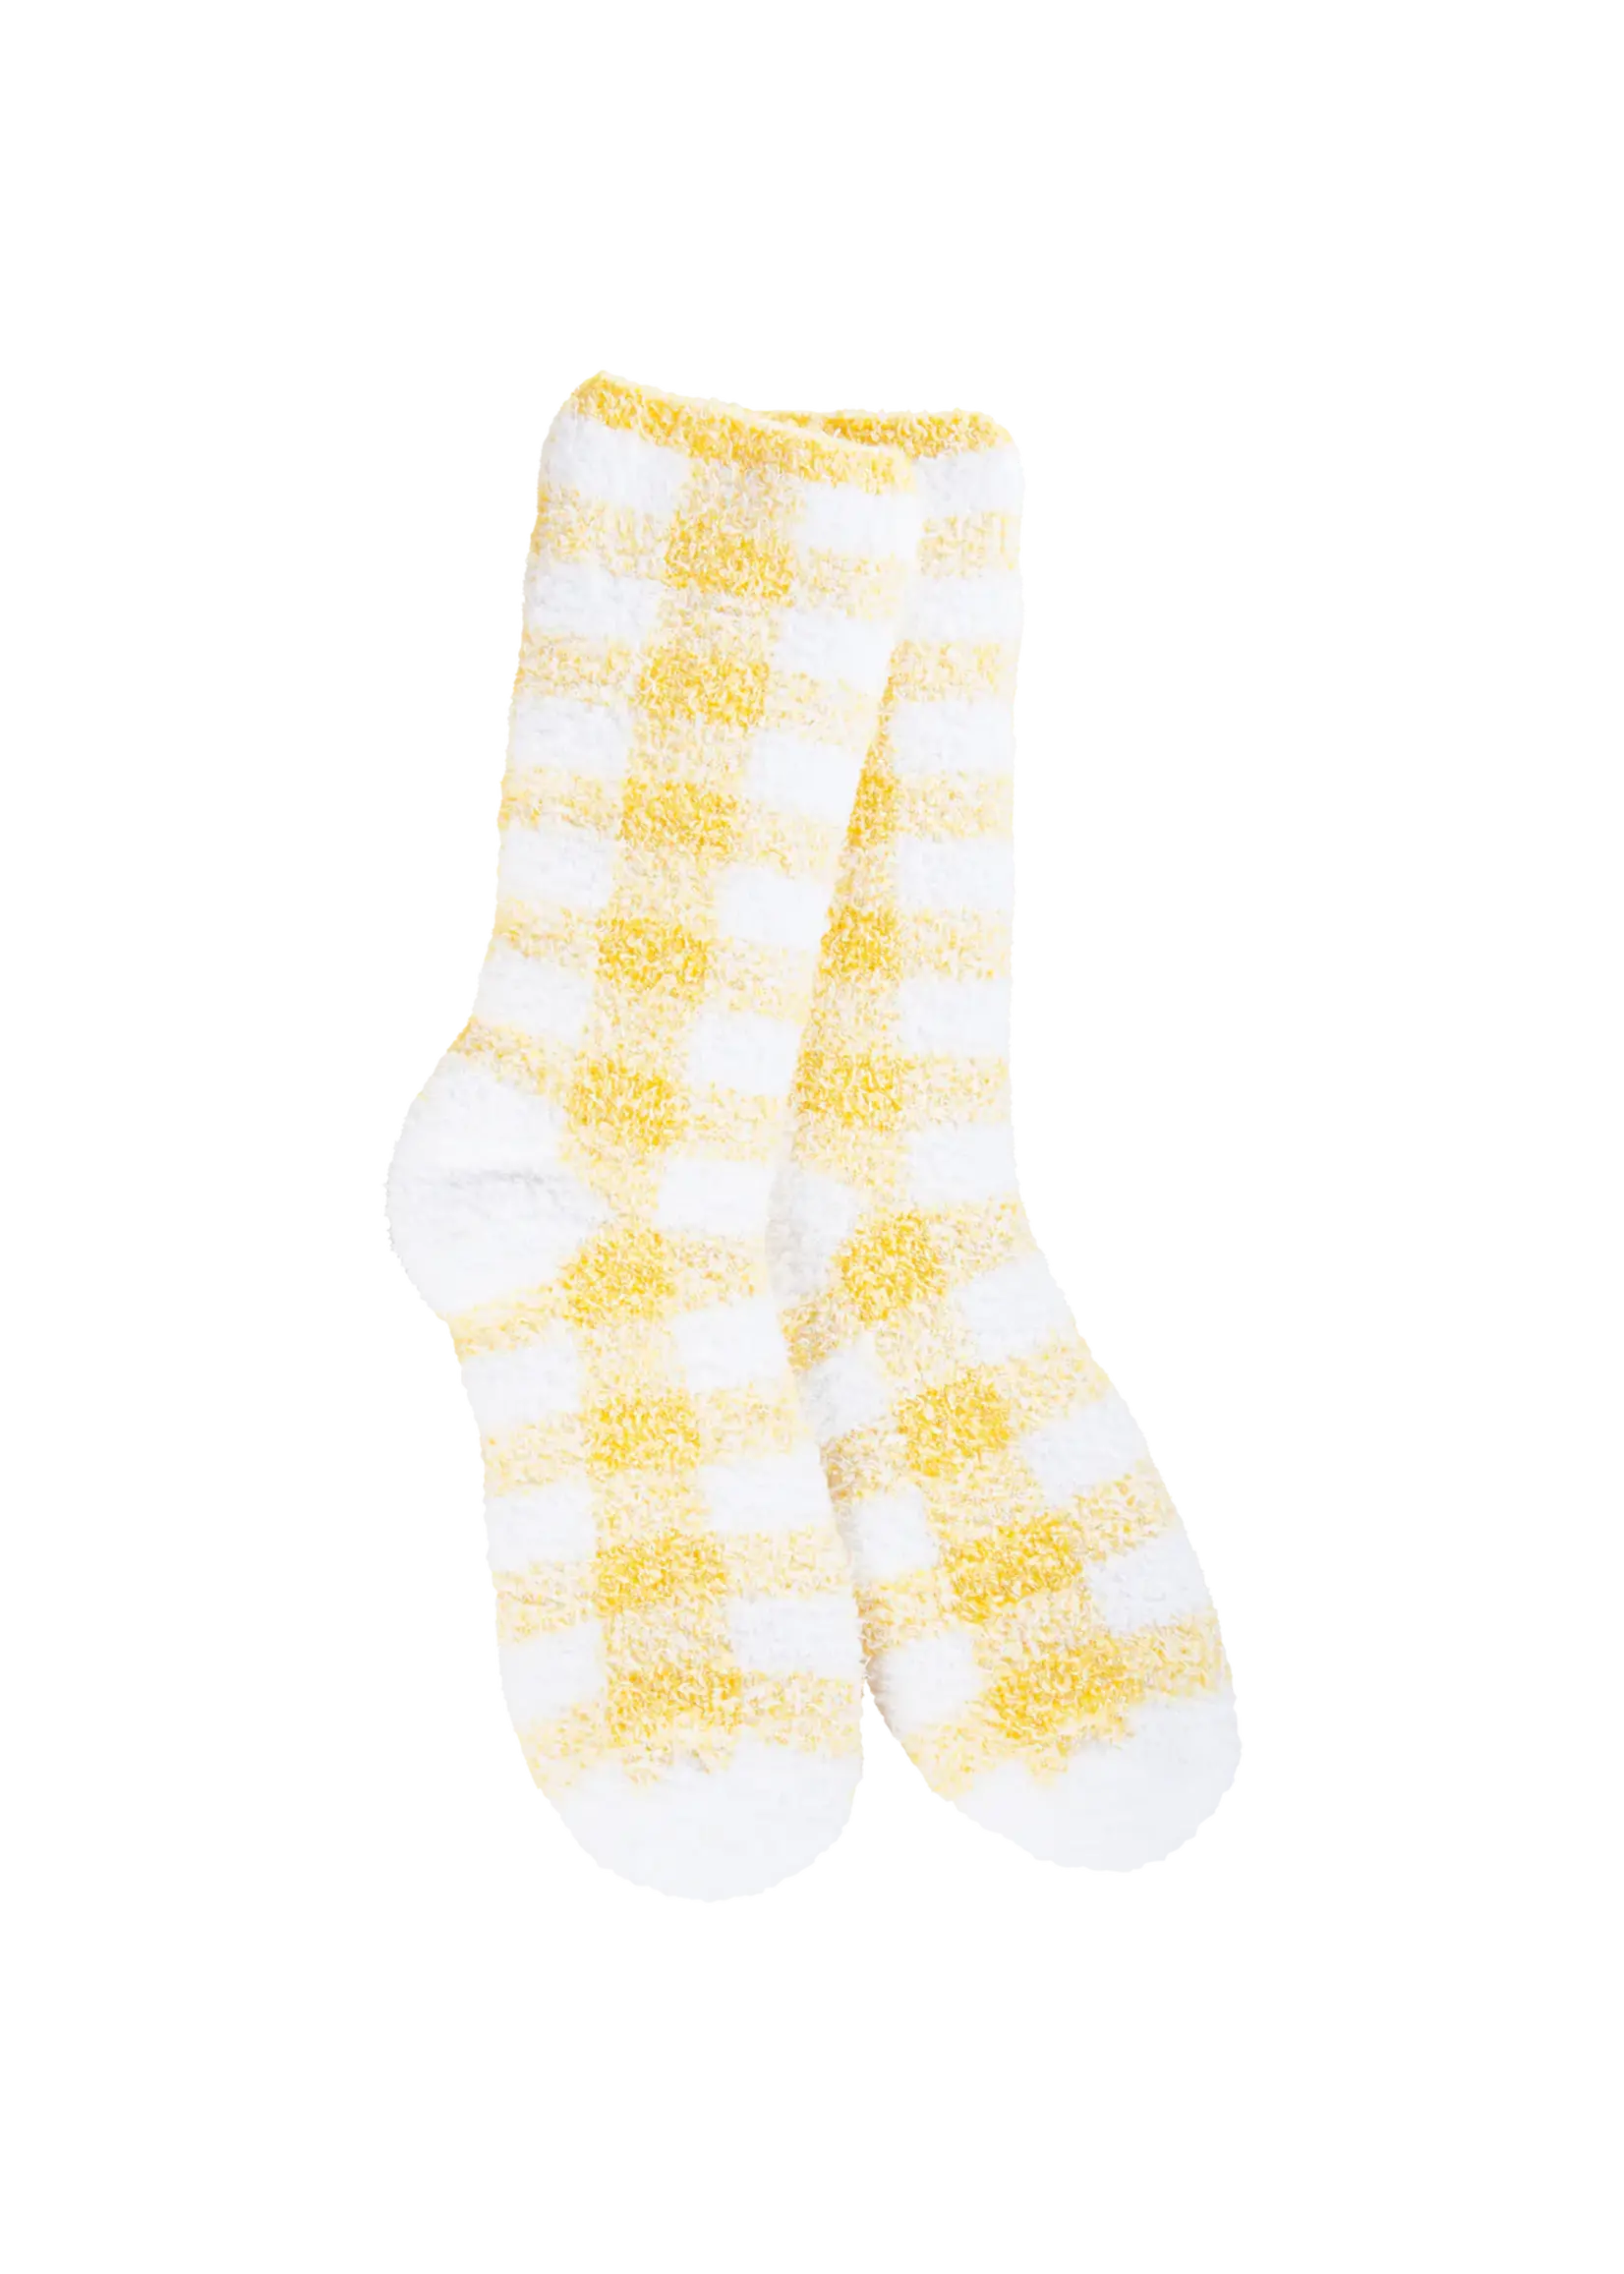 Yellow Check Knit Pickin’ Collection World’s Softest Socks